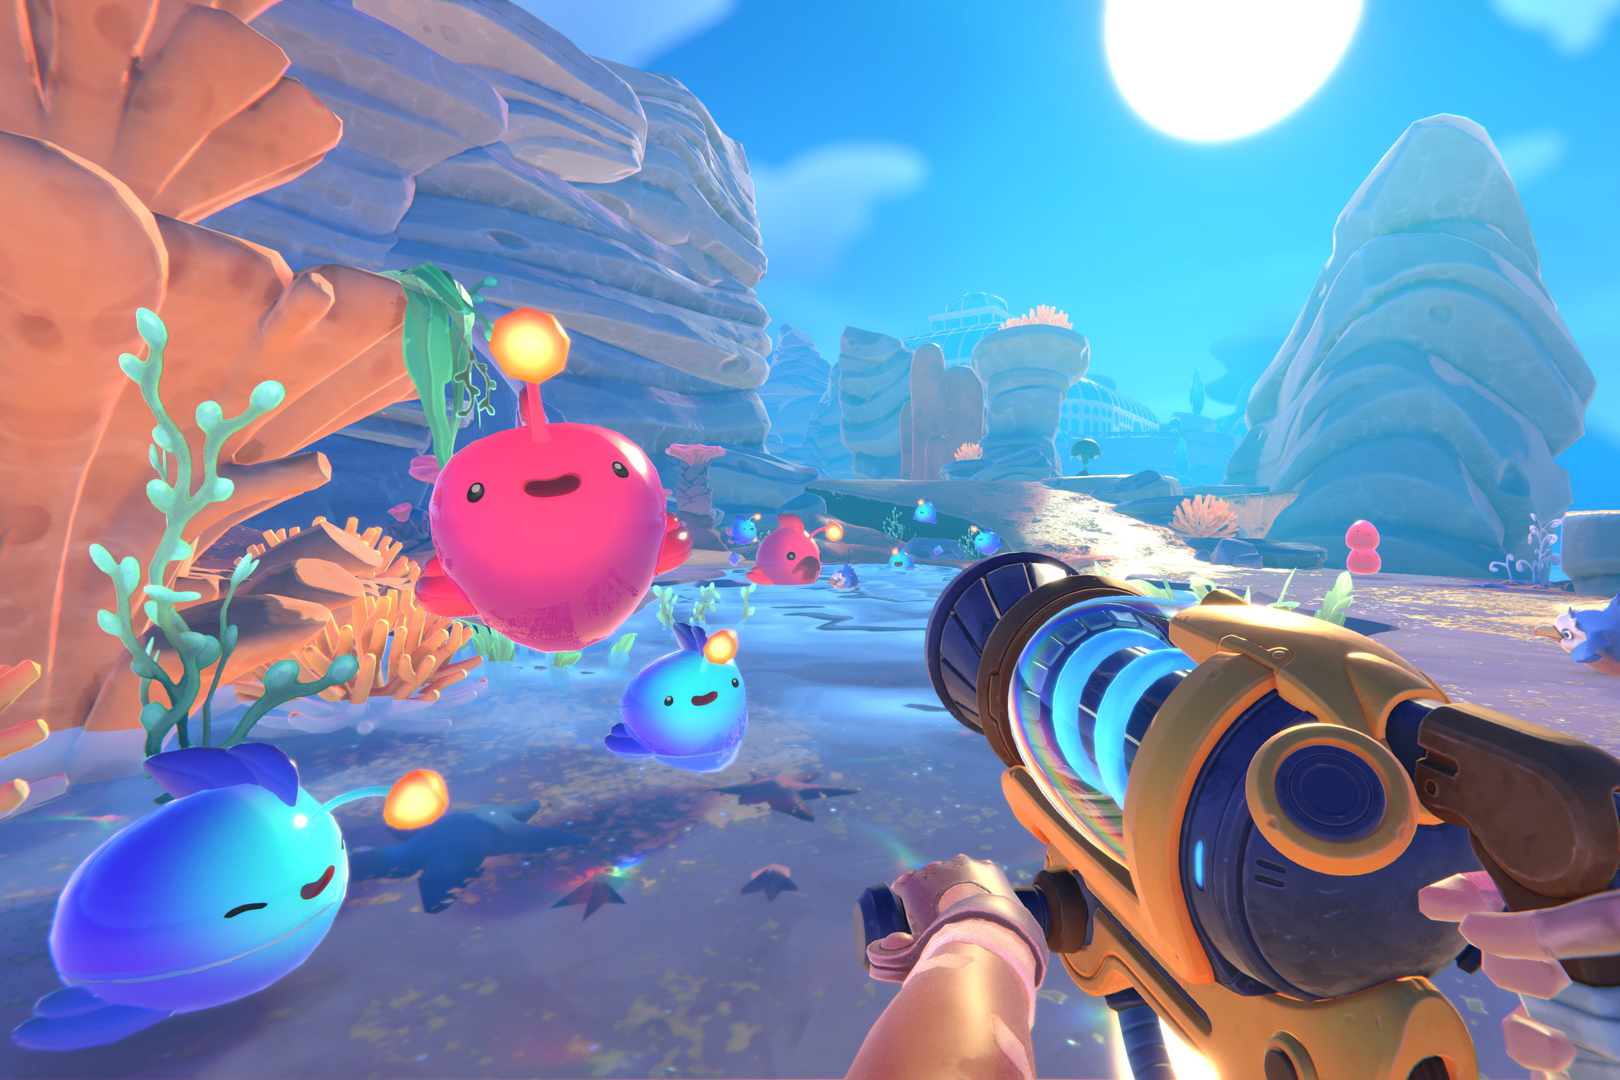 Home - Slime Rancher 2